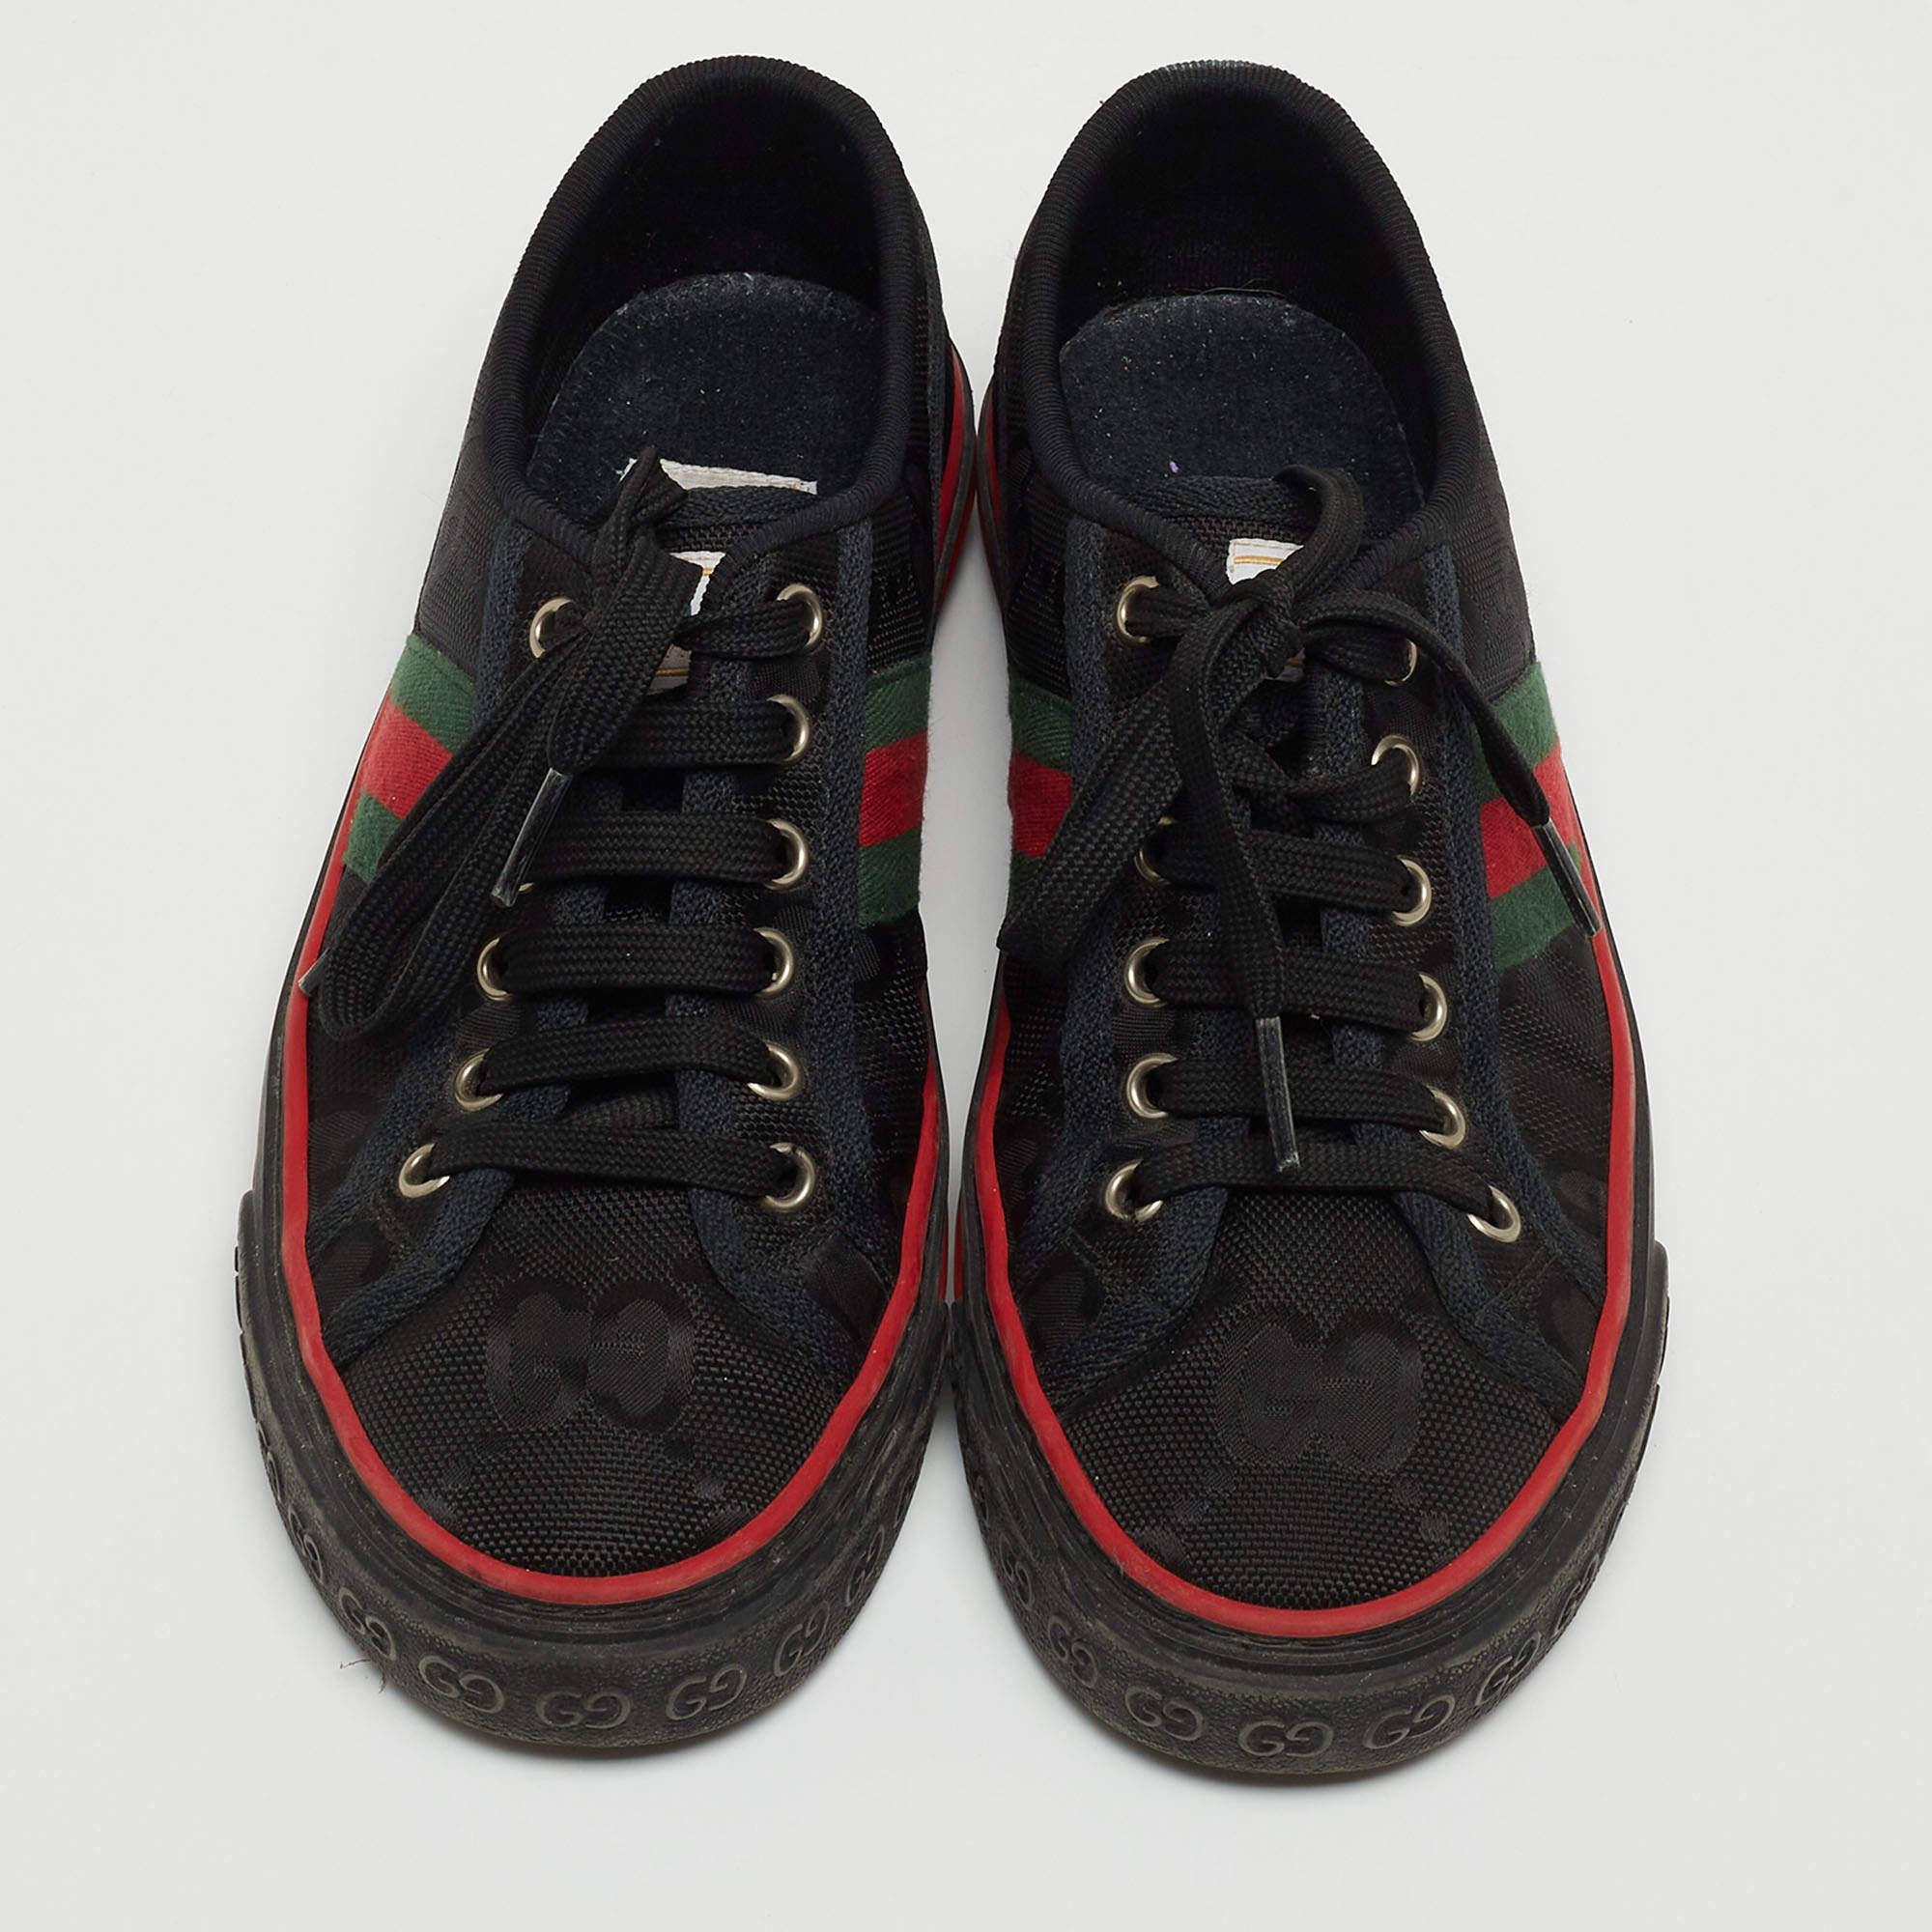 Gucci Black GG Canvas Tennis 1977 Sneakers Size 36 For Sale 4